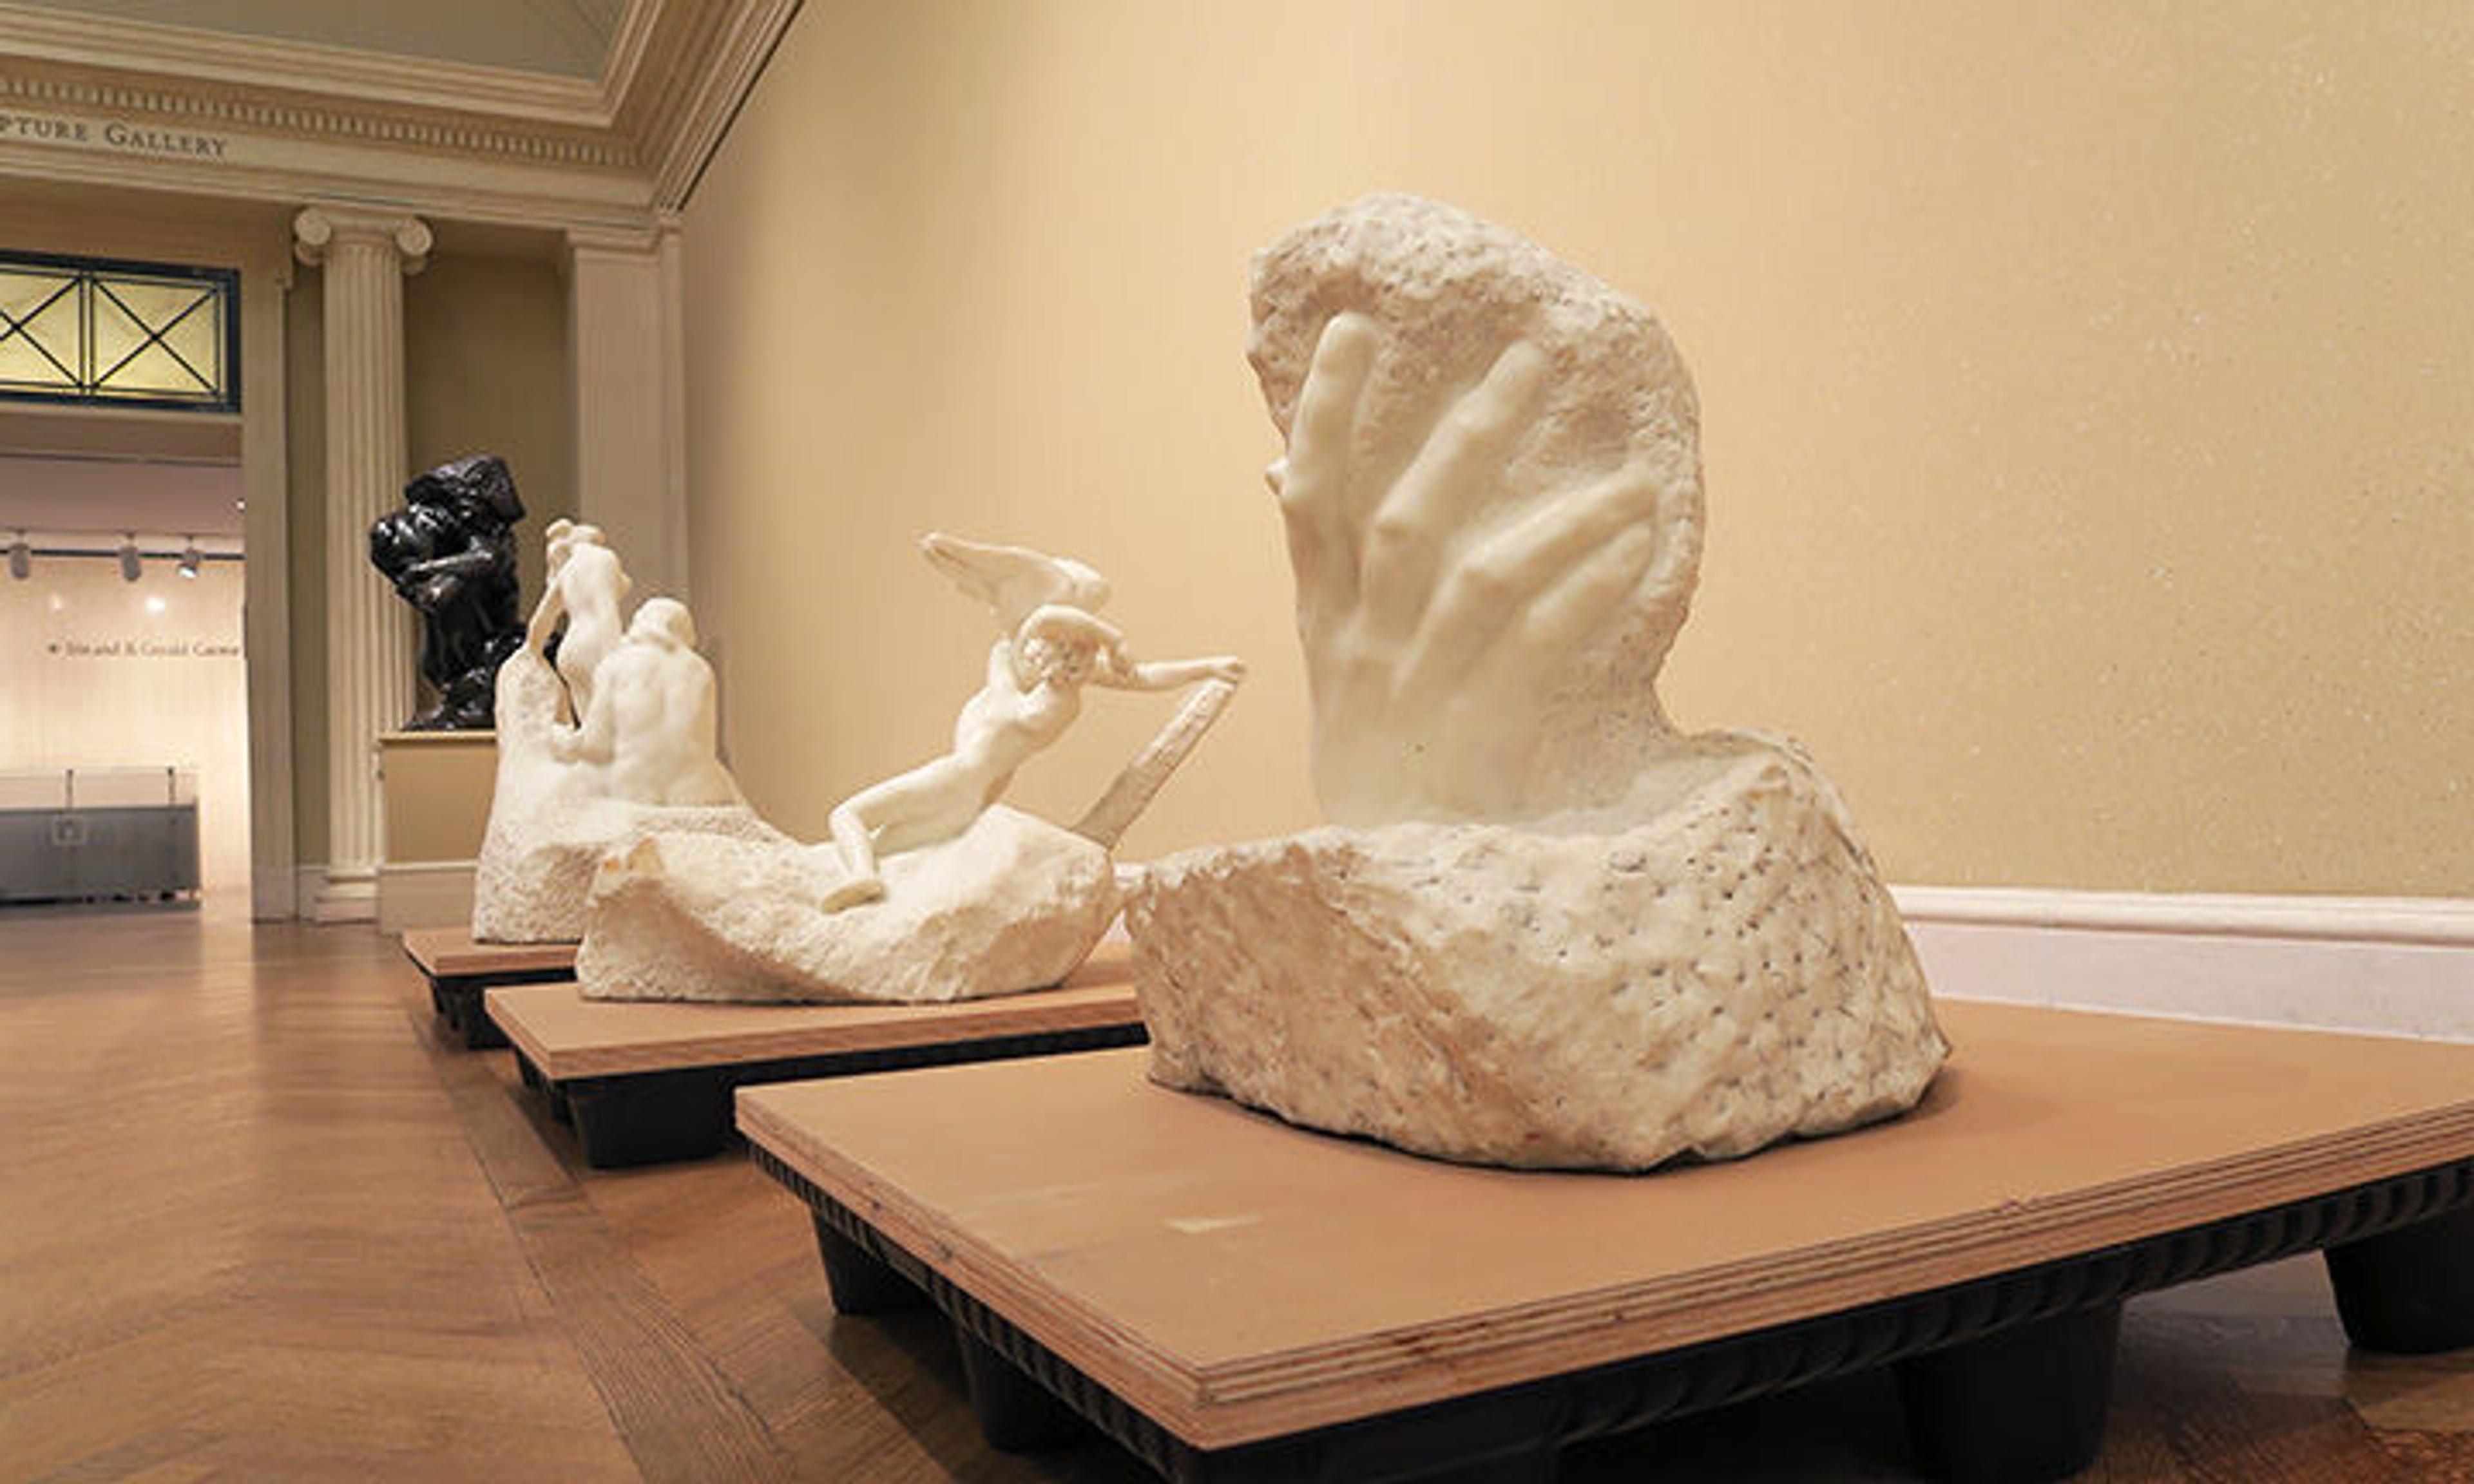 The Hand of God and other marble sculptures by Rodin lined up on pallets, ready for relocation.